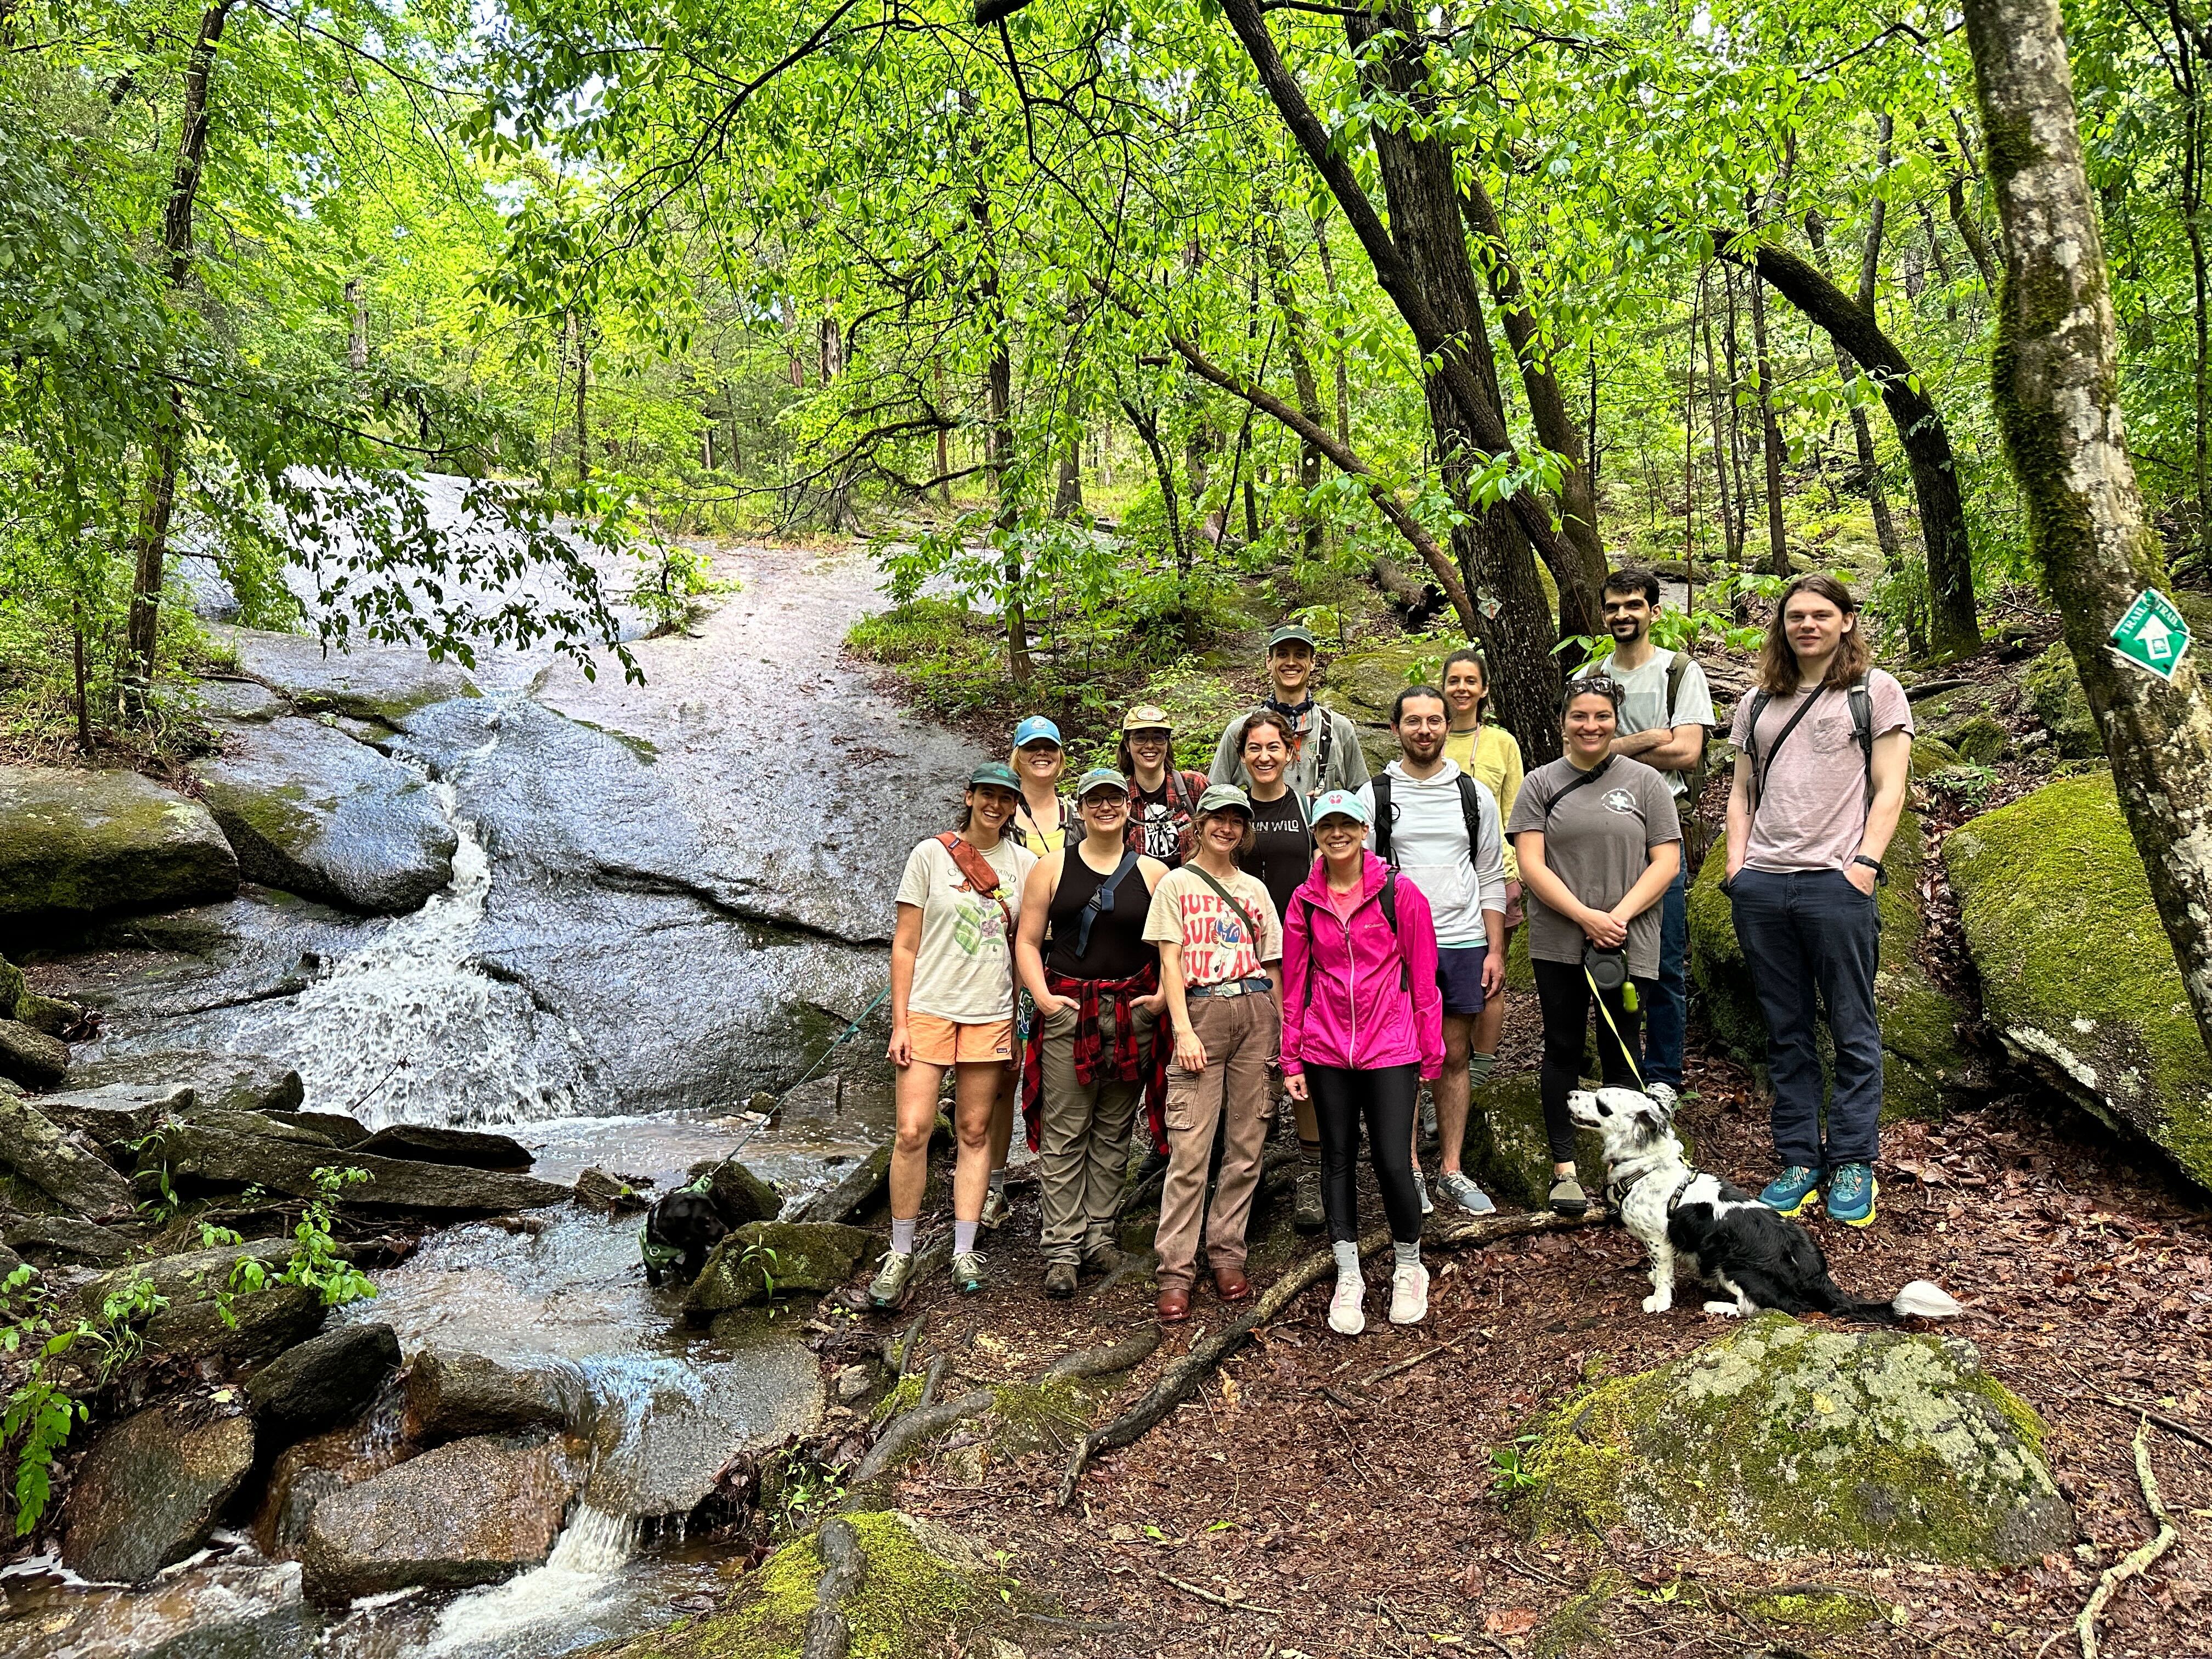 BSA student chapter members near a waterfall during the hike at 40 Acre Rock (Kershaw, SC).